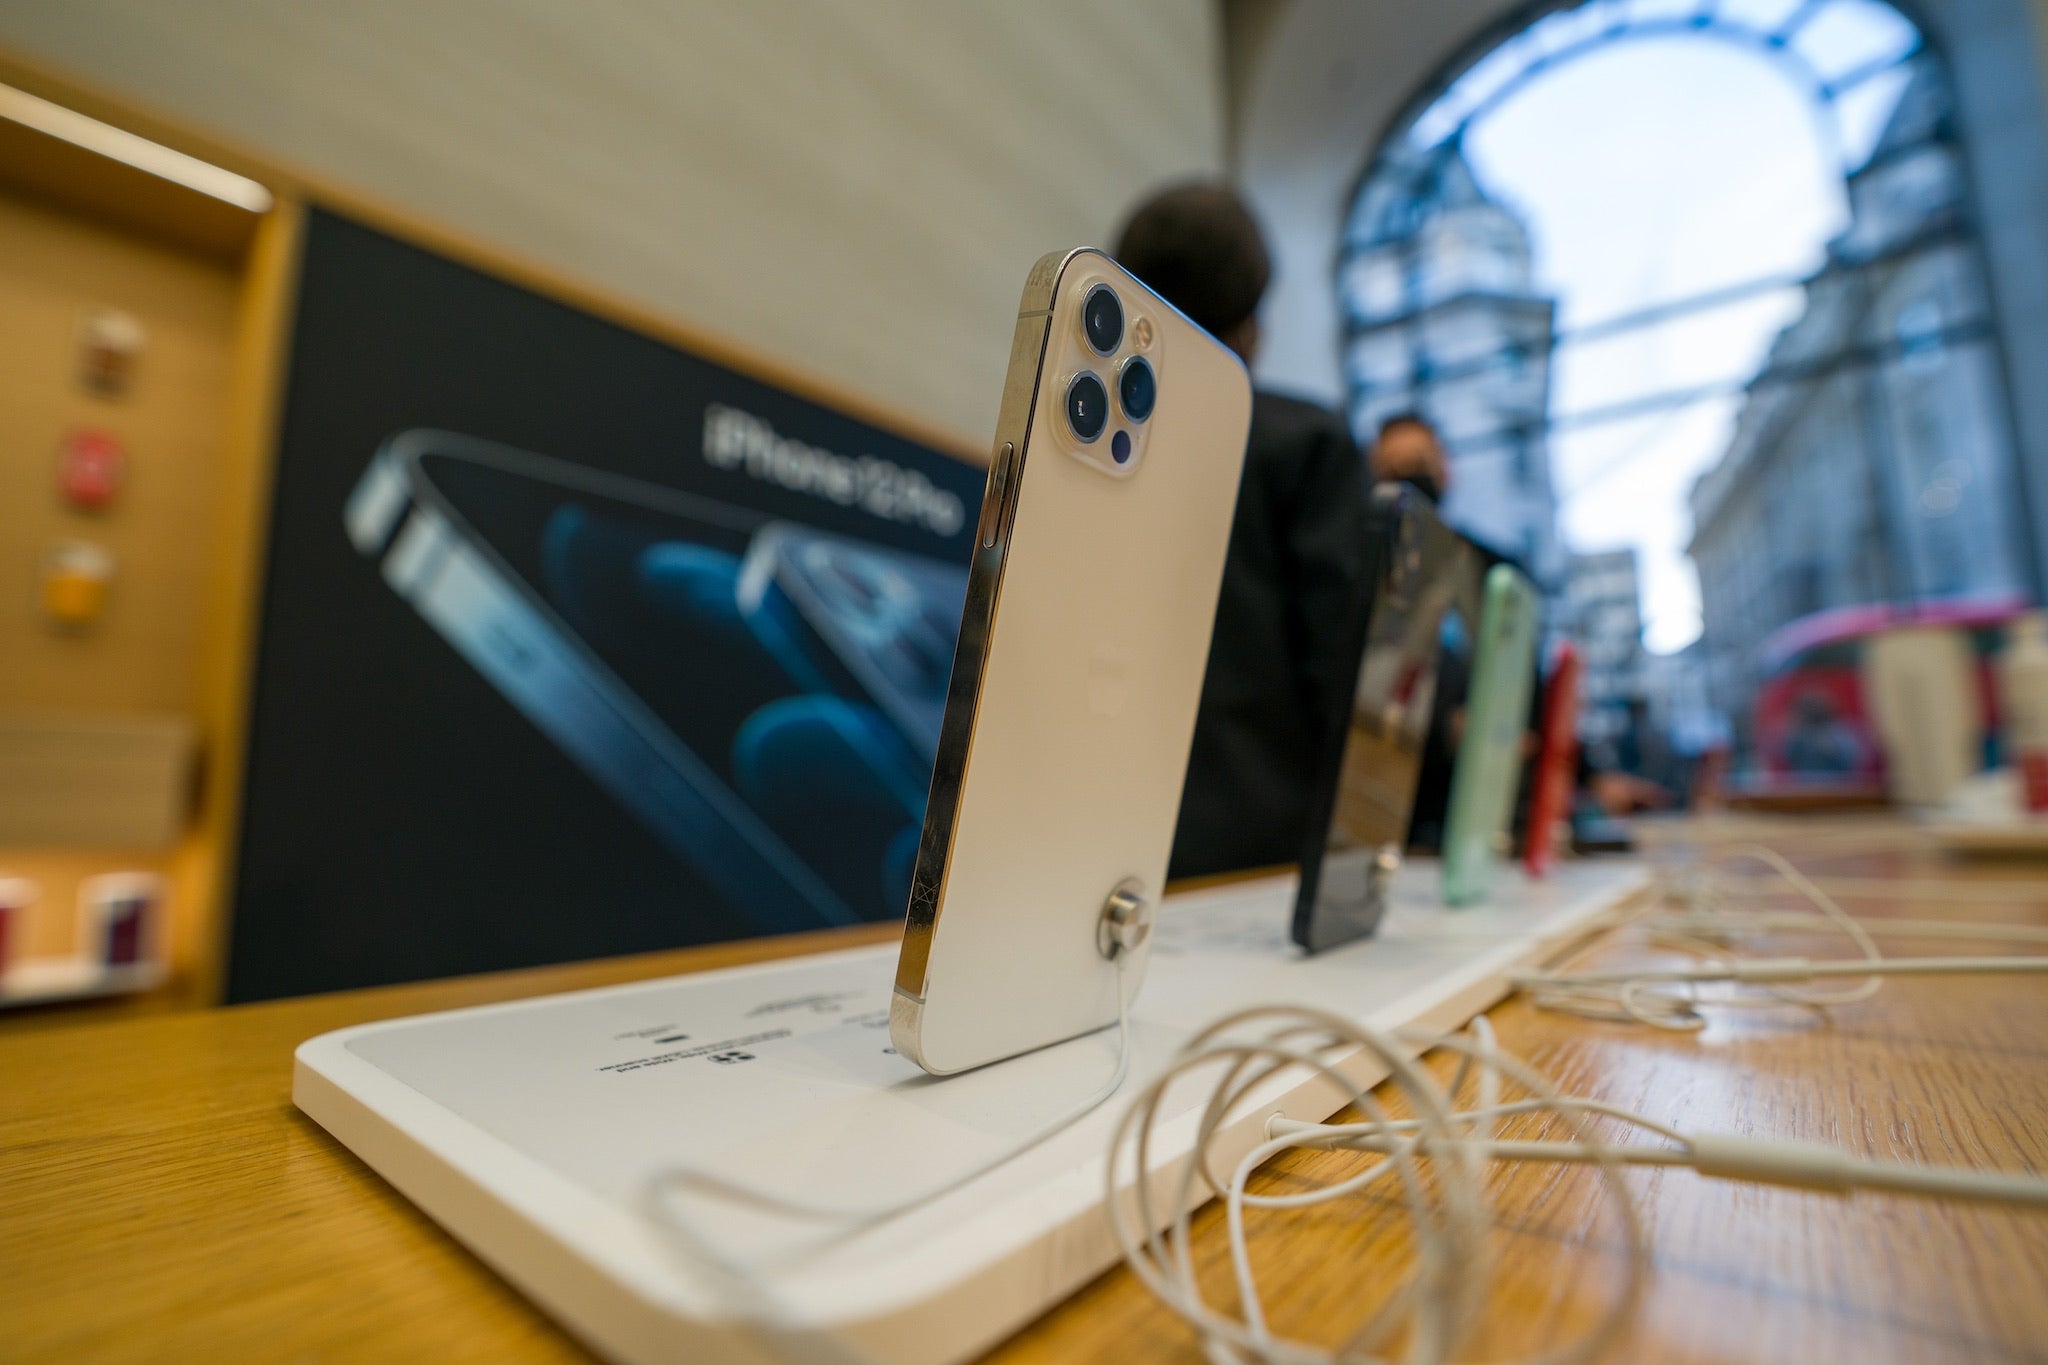 The new iPhone 12 and iPhone 12 Pro on display during launch day on October 23, 2020 in London, England. Apple's latest 5G smartphones go on sale in the UK today